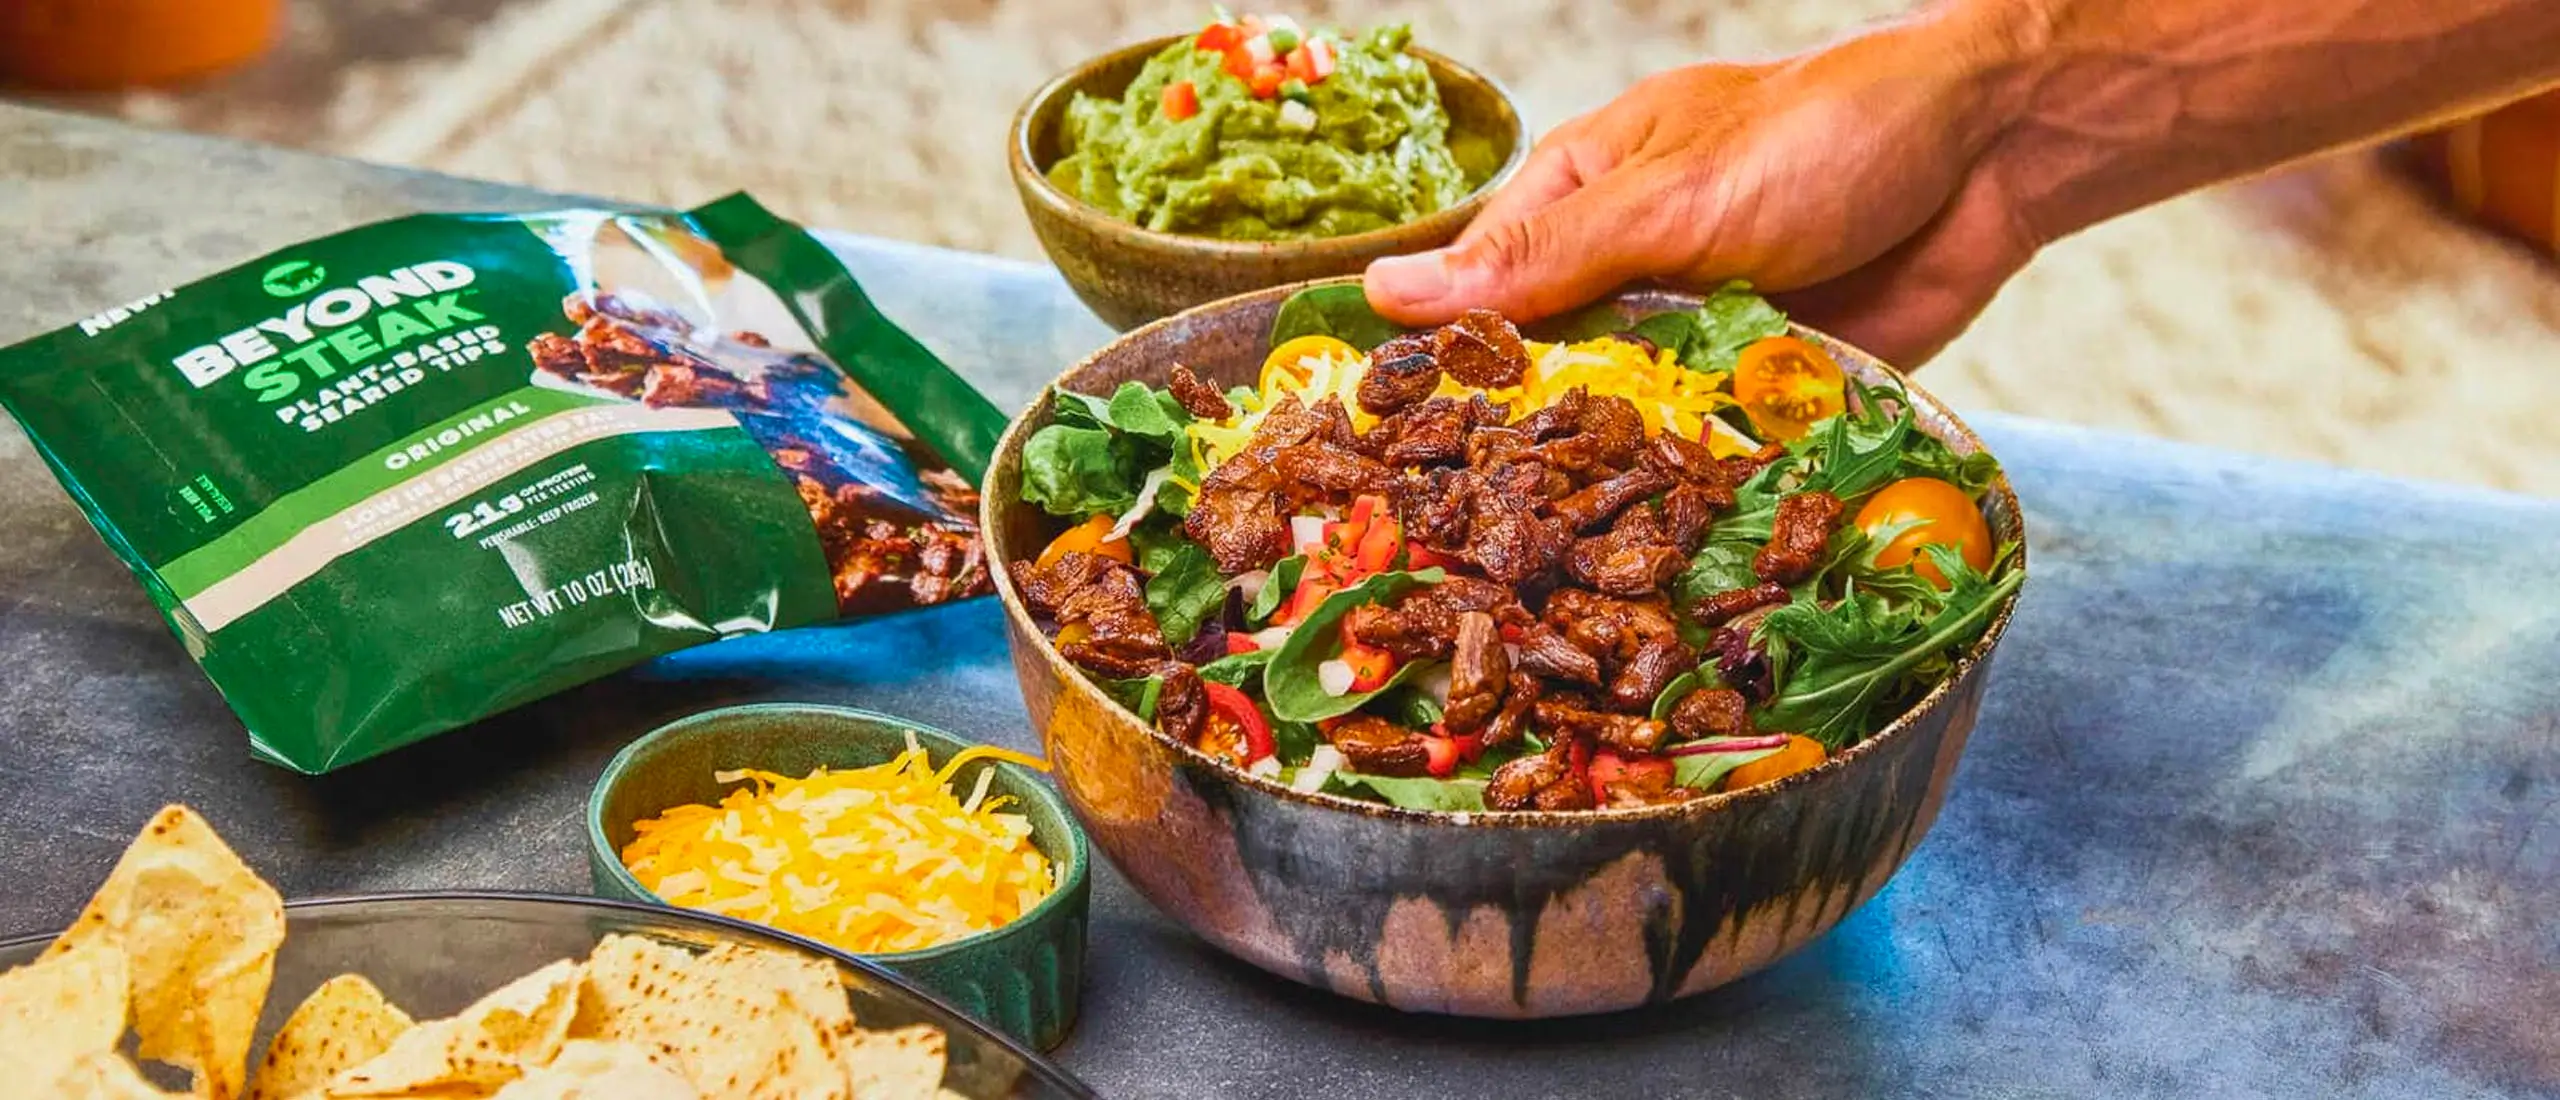 man holding steak salad bowl with chips and guacamole